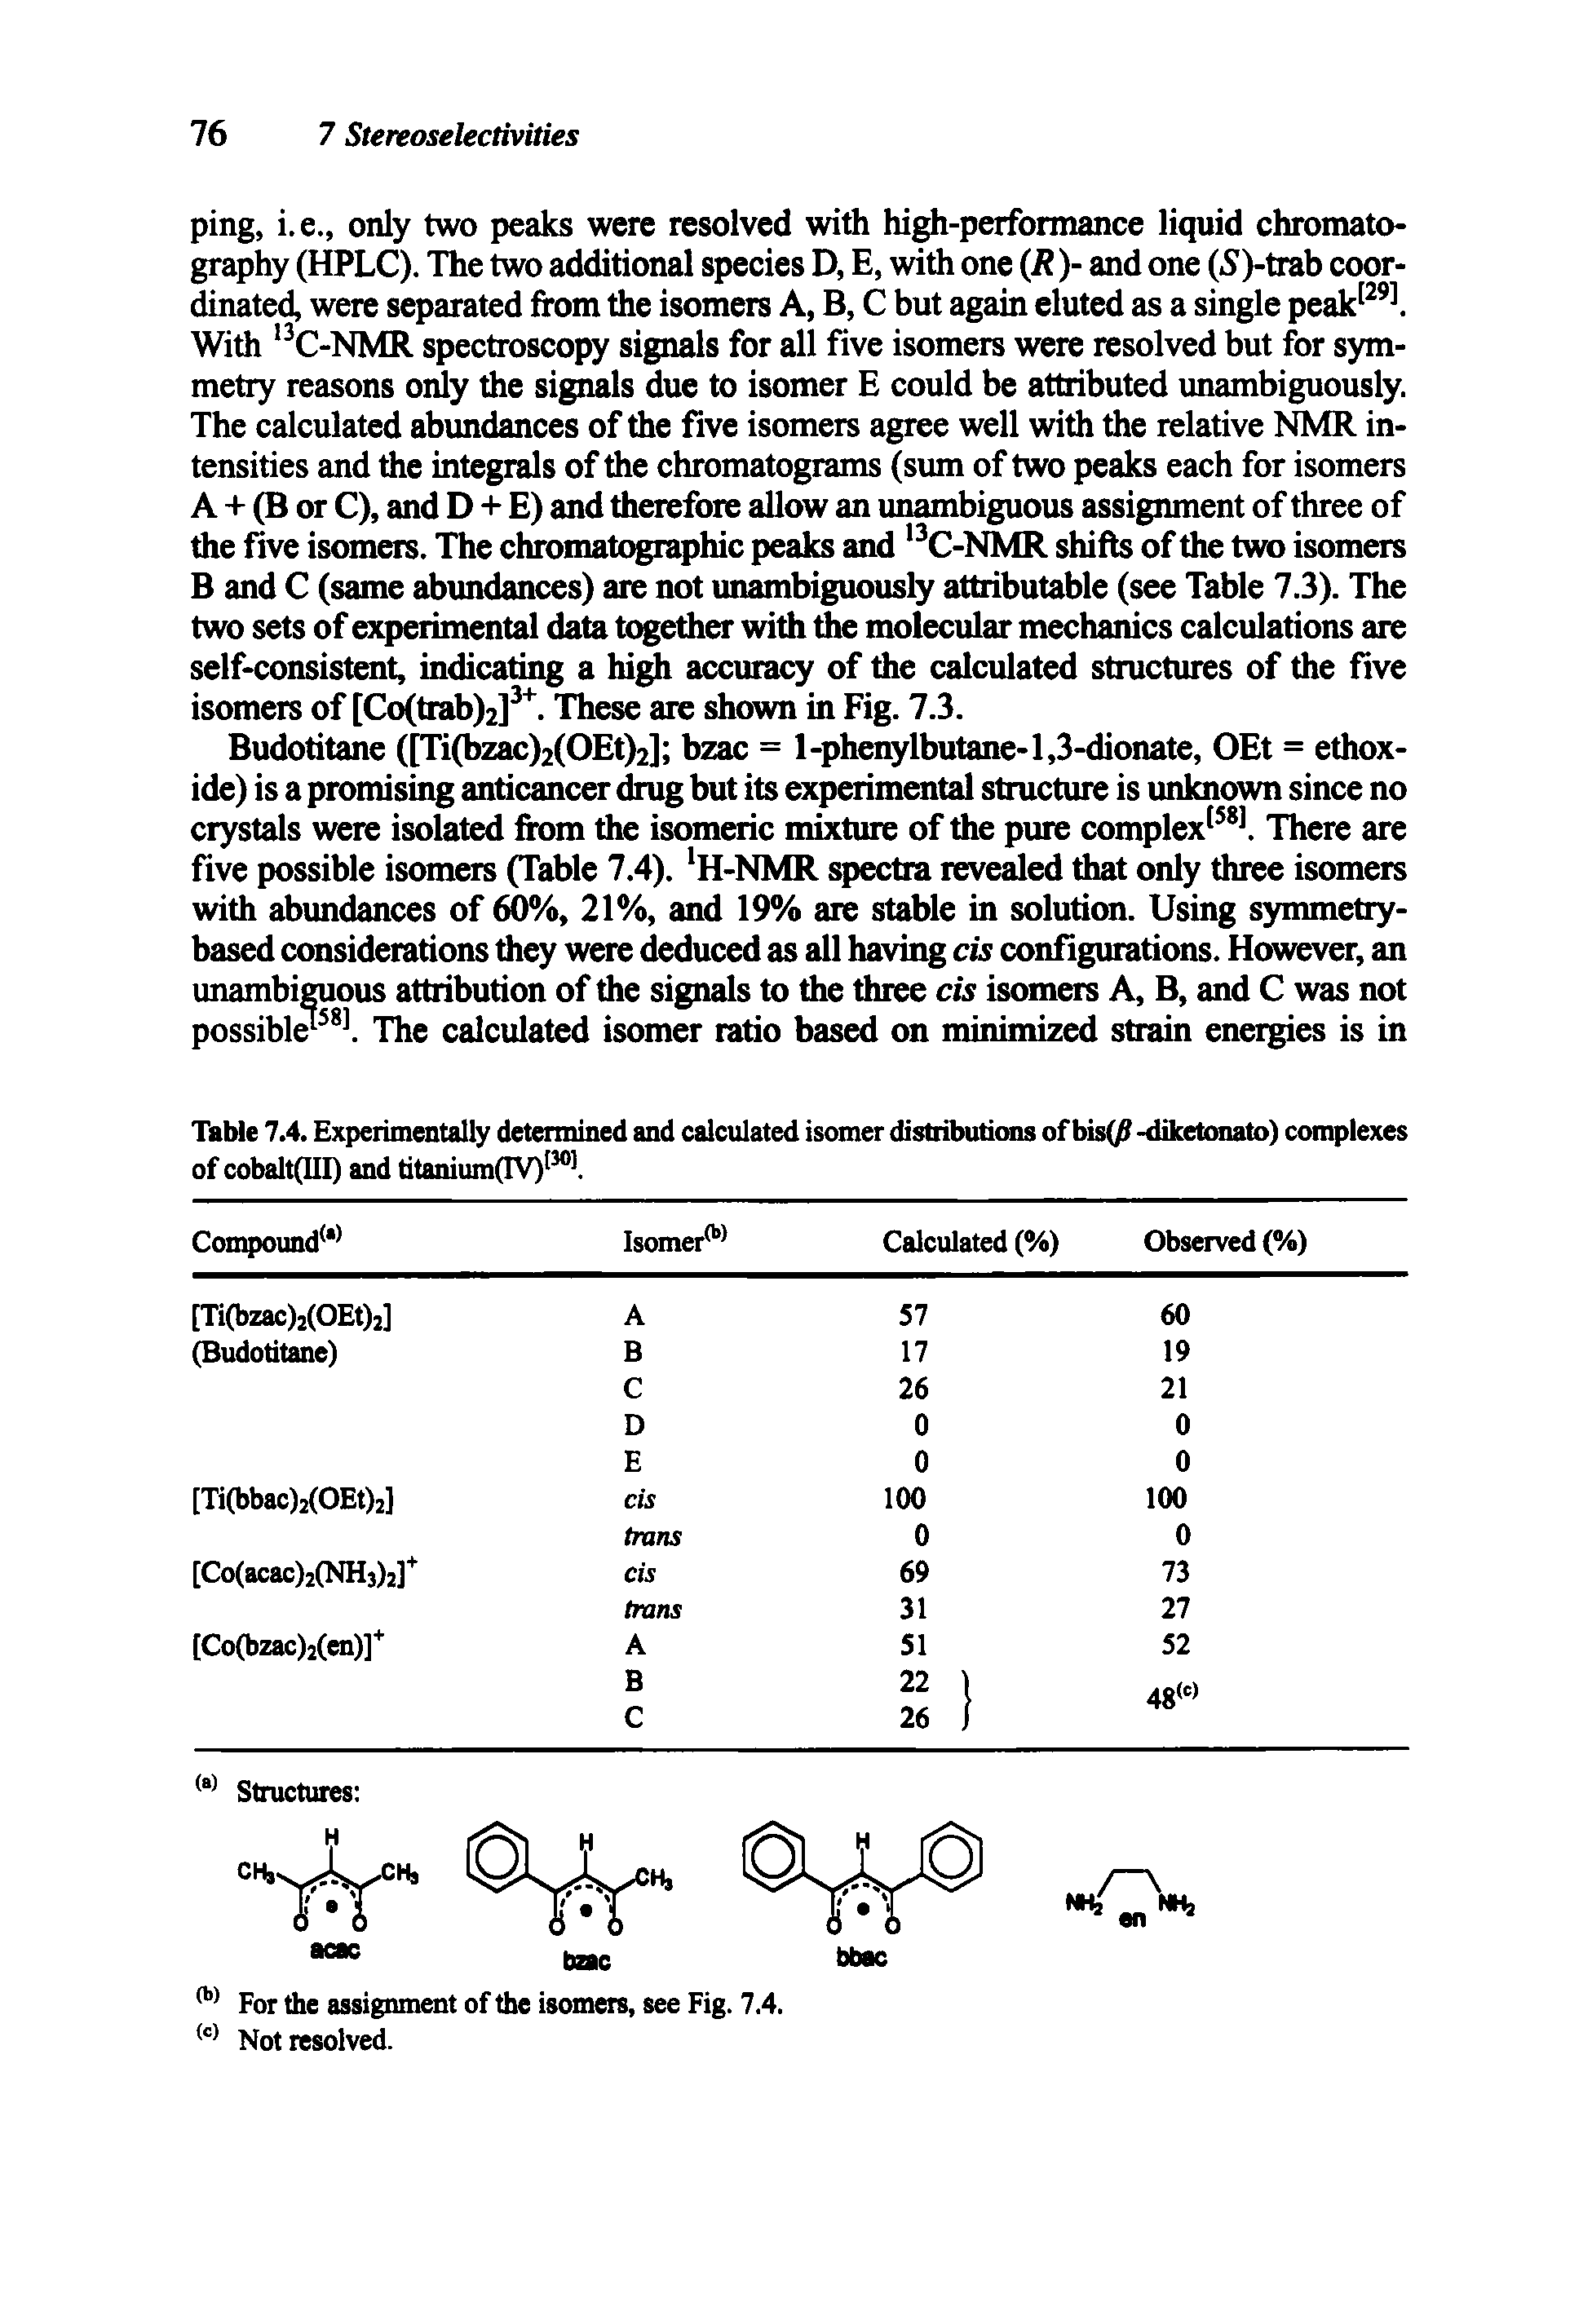 Table 7.4. Experimentally determined and calculated isomer distributions ofbis(/ -diketonato) complexes of cobalt(III) and titanium(IV)1301.